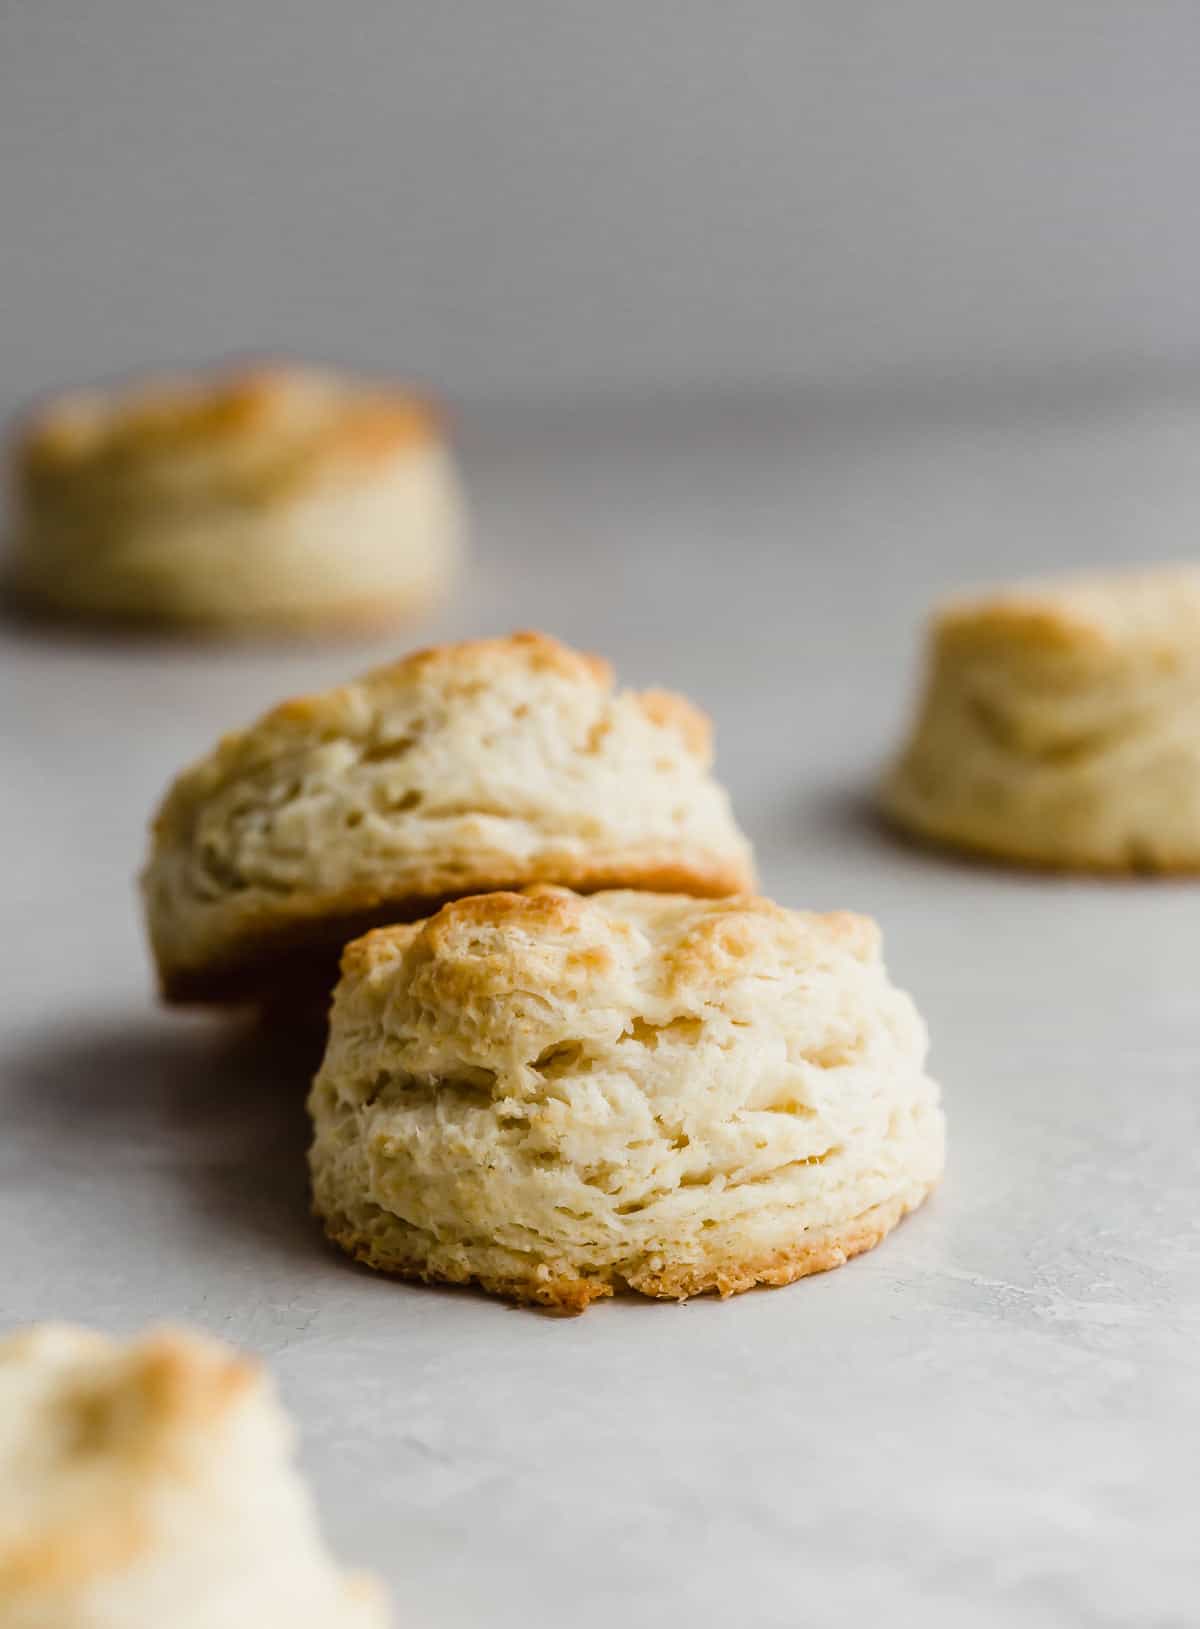 Two Flaky buttermilk biscuits on a light gray background.